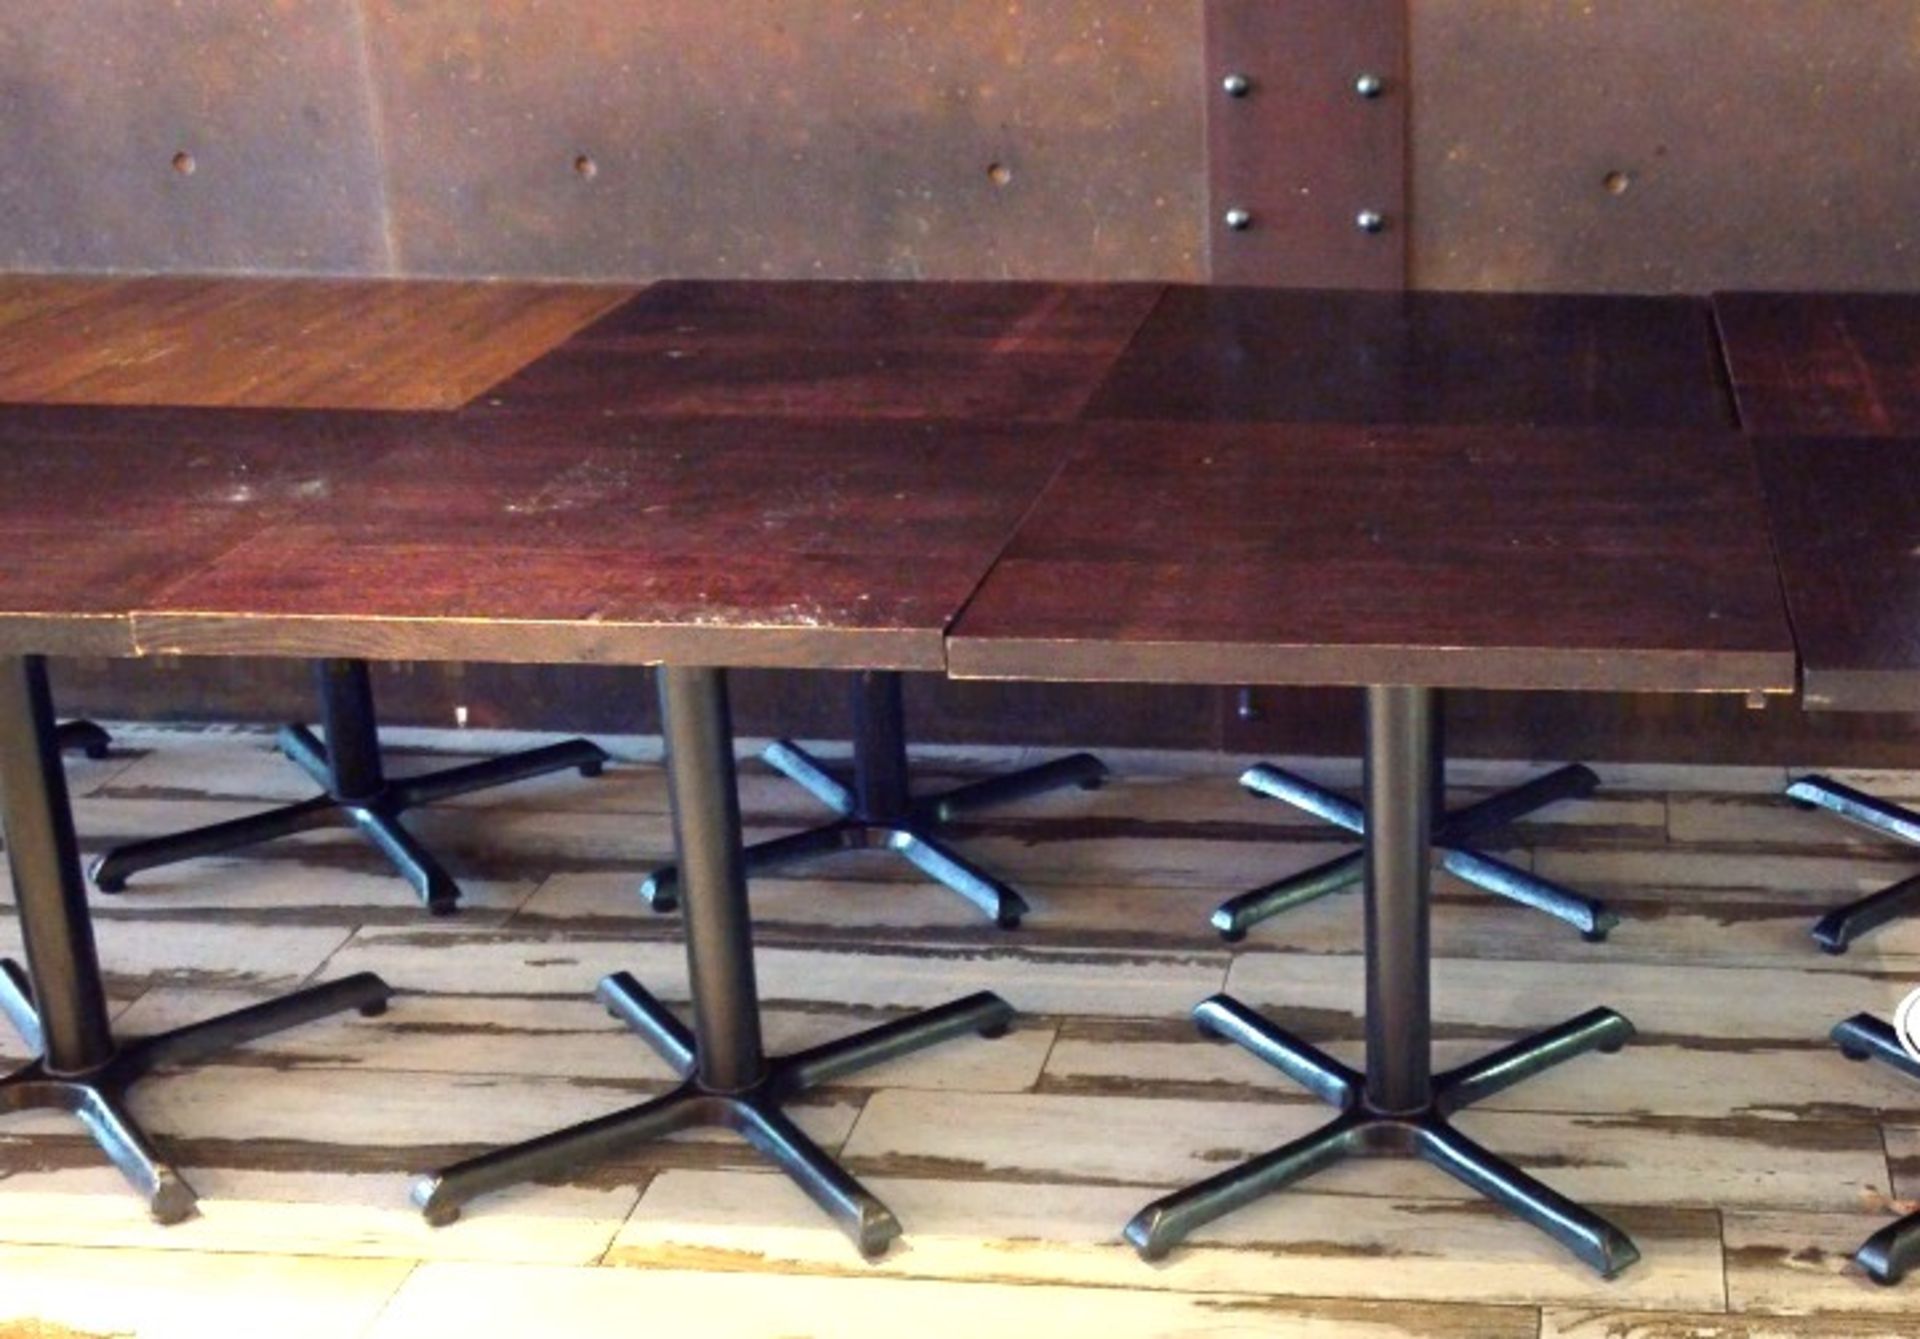 4 x Square Restaurant Tables With Dark Brown Wooden Tops and Cast Iron Bases - Image 2 of 3